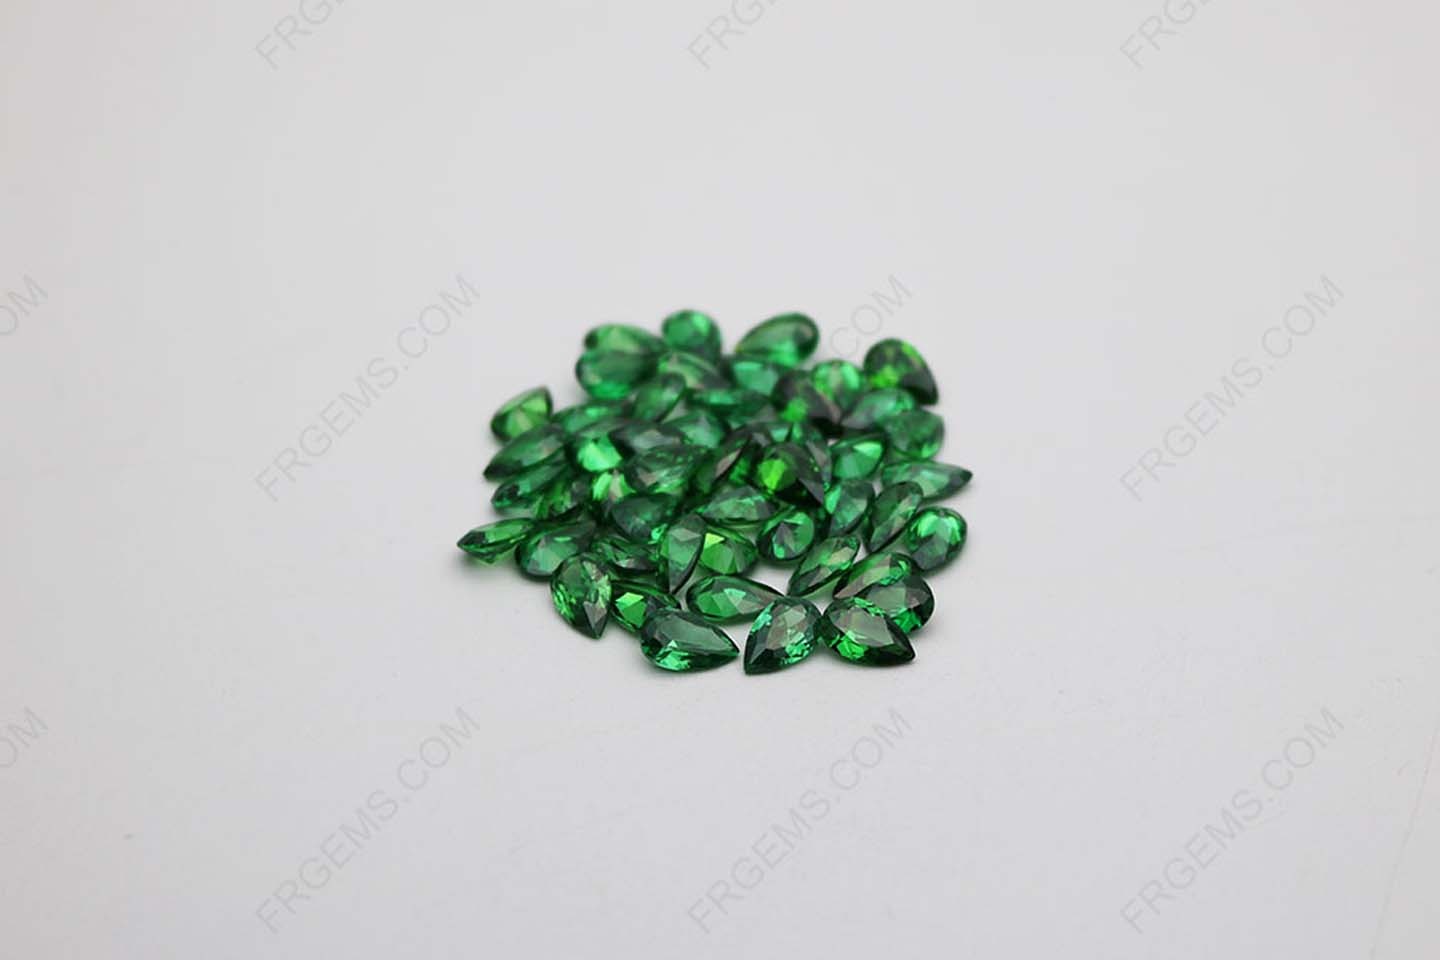 Cubic Zirconia Green Pear Shape Faceted Cut 5x3mm stones CZ35 IMG_2089